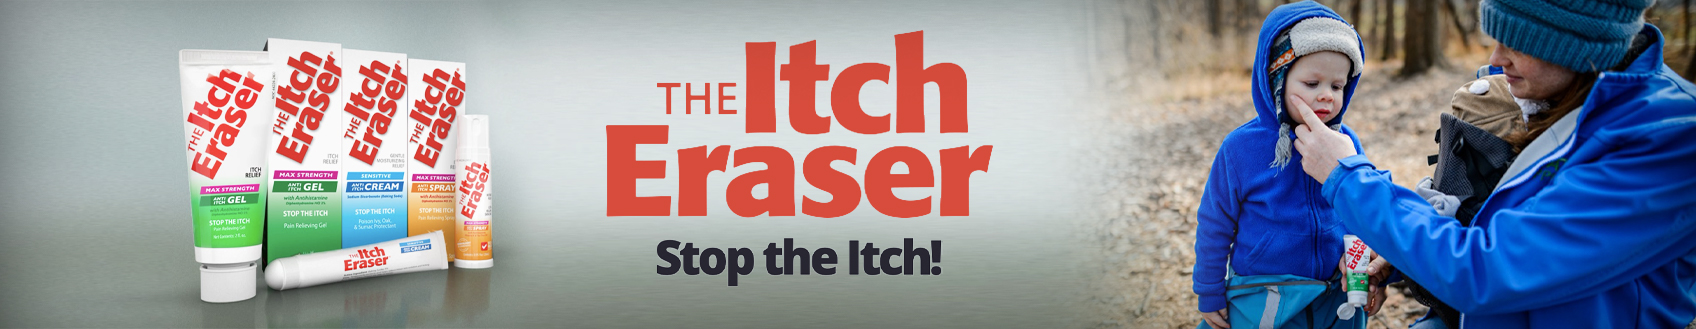 The Itch Eraser